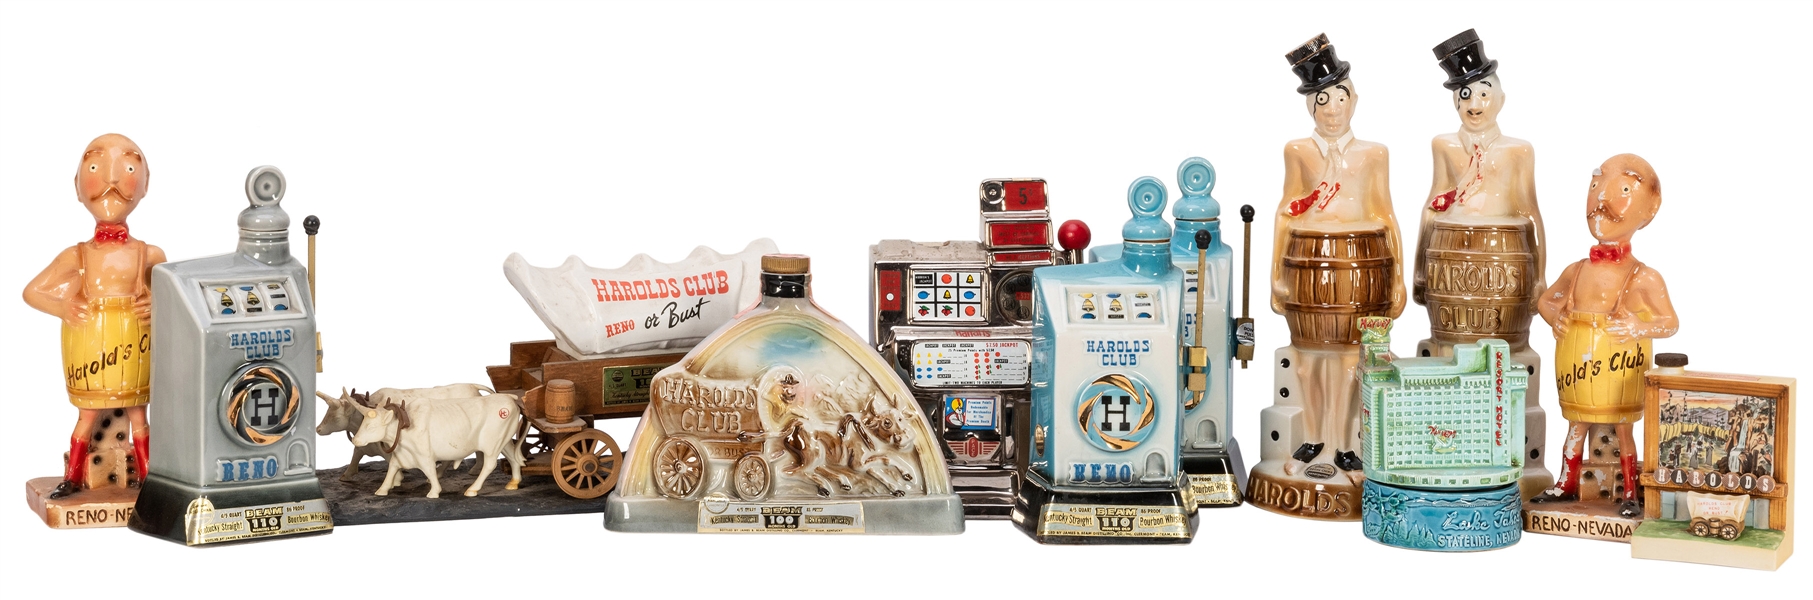  Harold’s Club / Casino Whiskey Decanters and Figural Pieces...